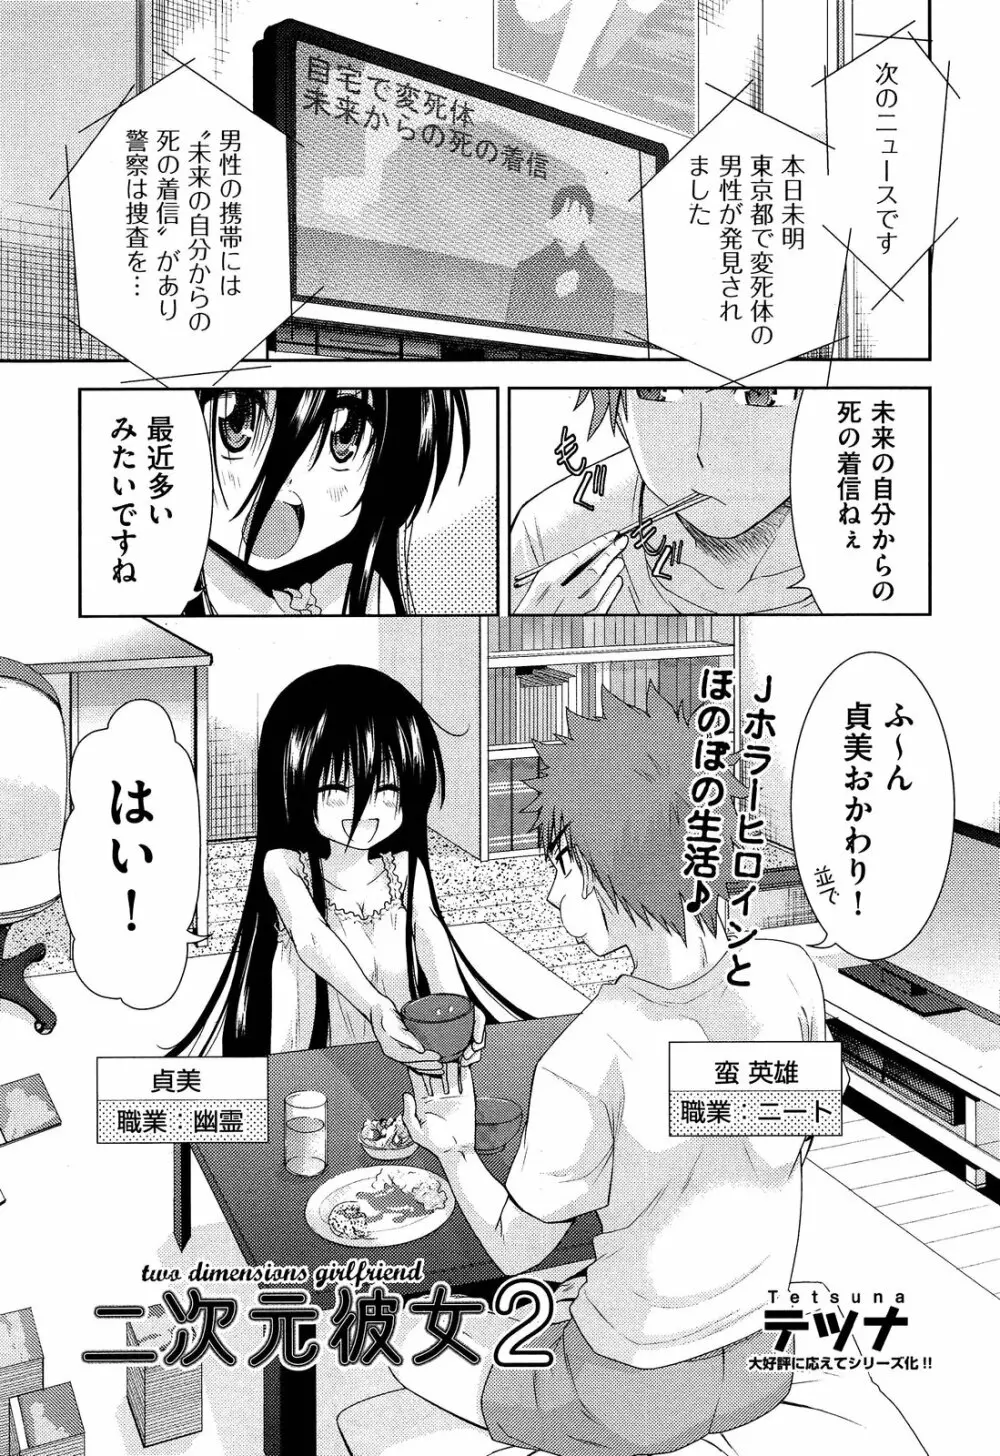 Two dimensions girlfriend Ch.1-4 25ページ